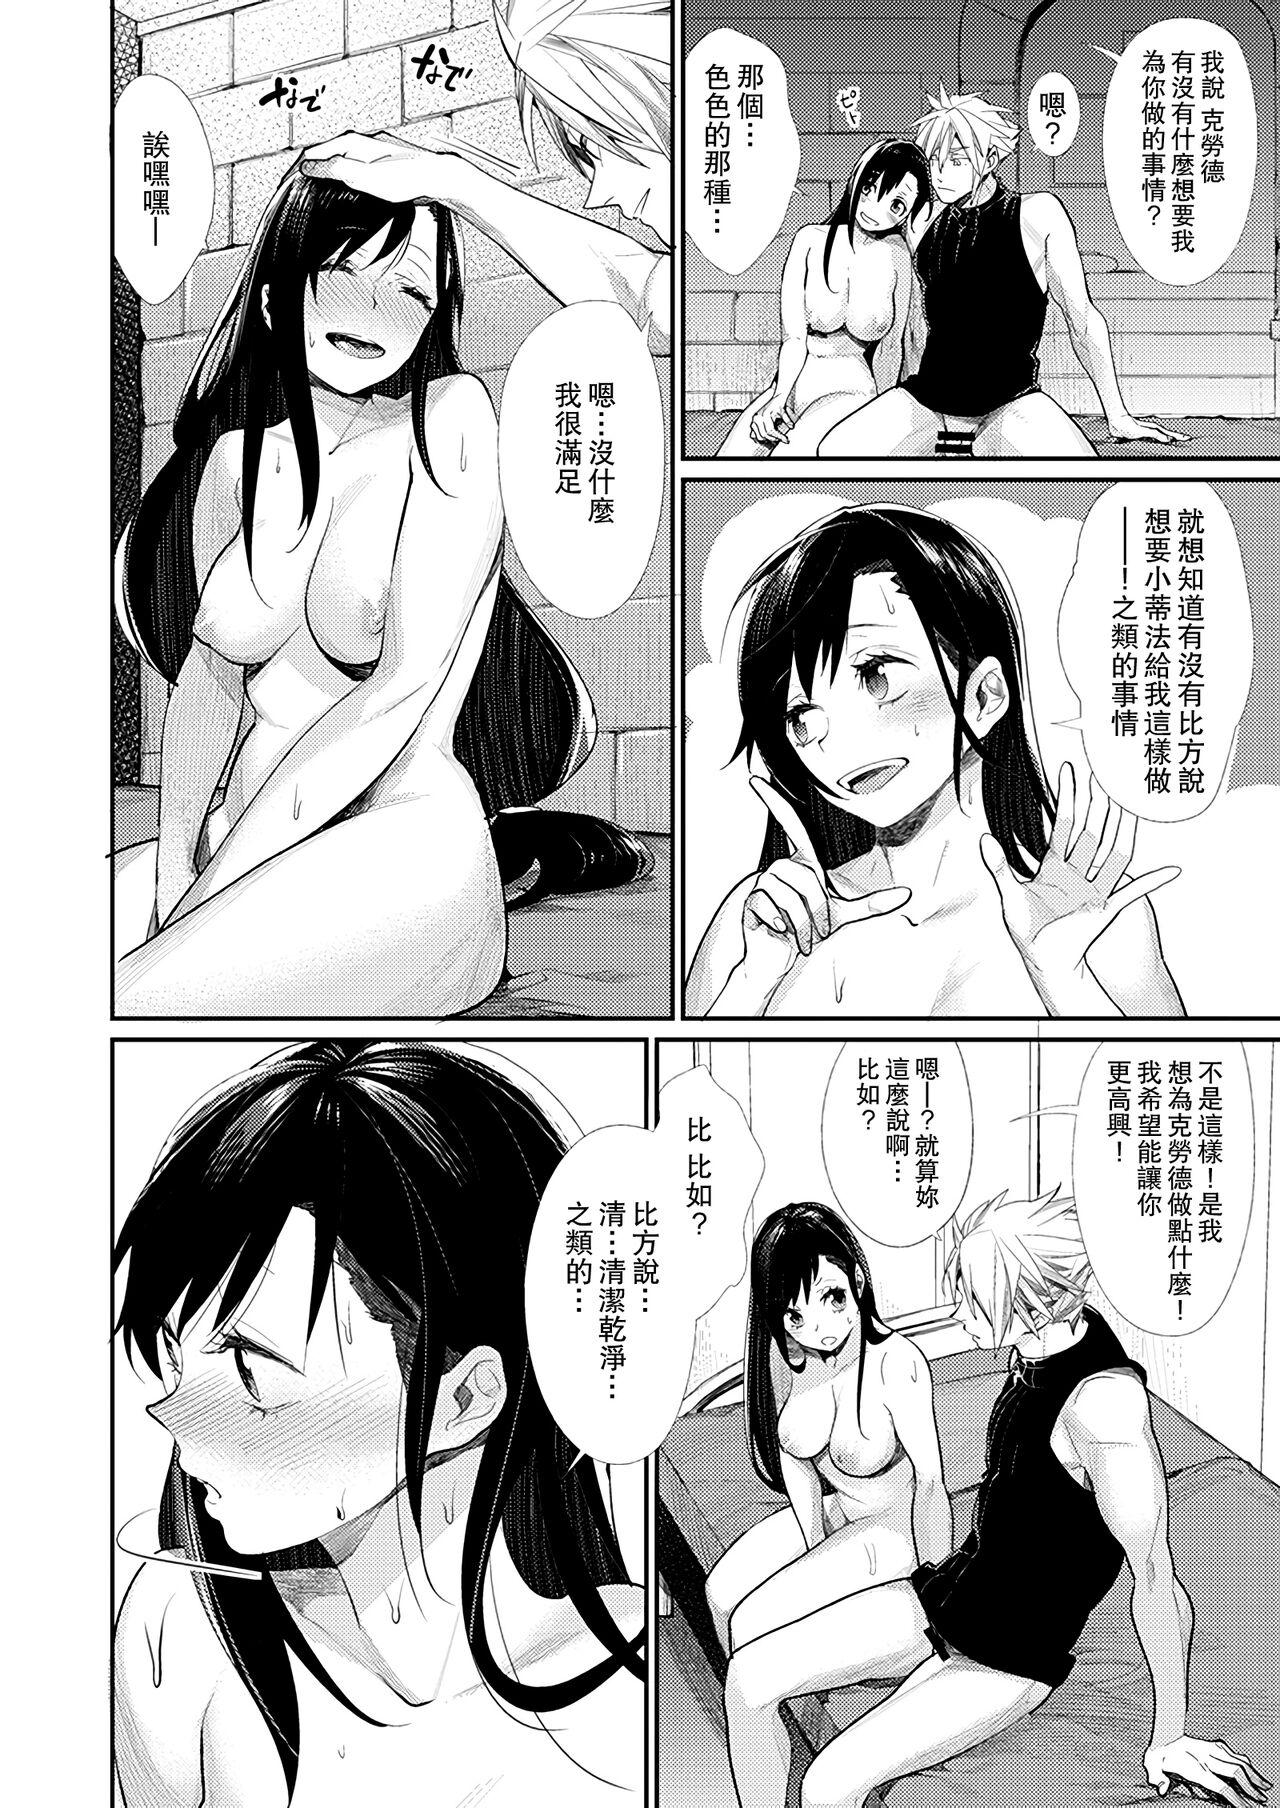 First あじわう？ティファのエアーズロック + 凄いの十回分！ - Final fantasy vii Gay 3some - Page 3